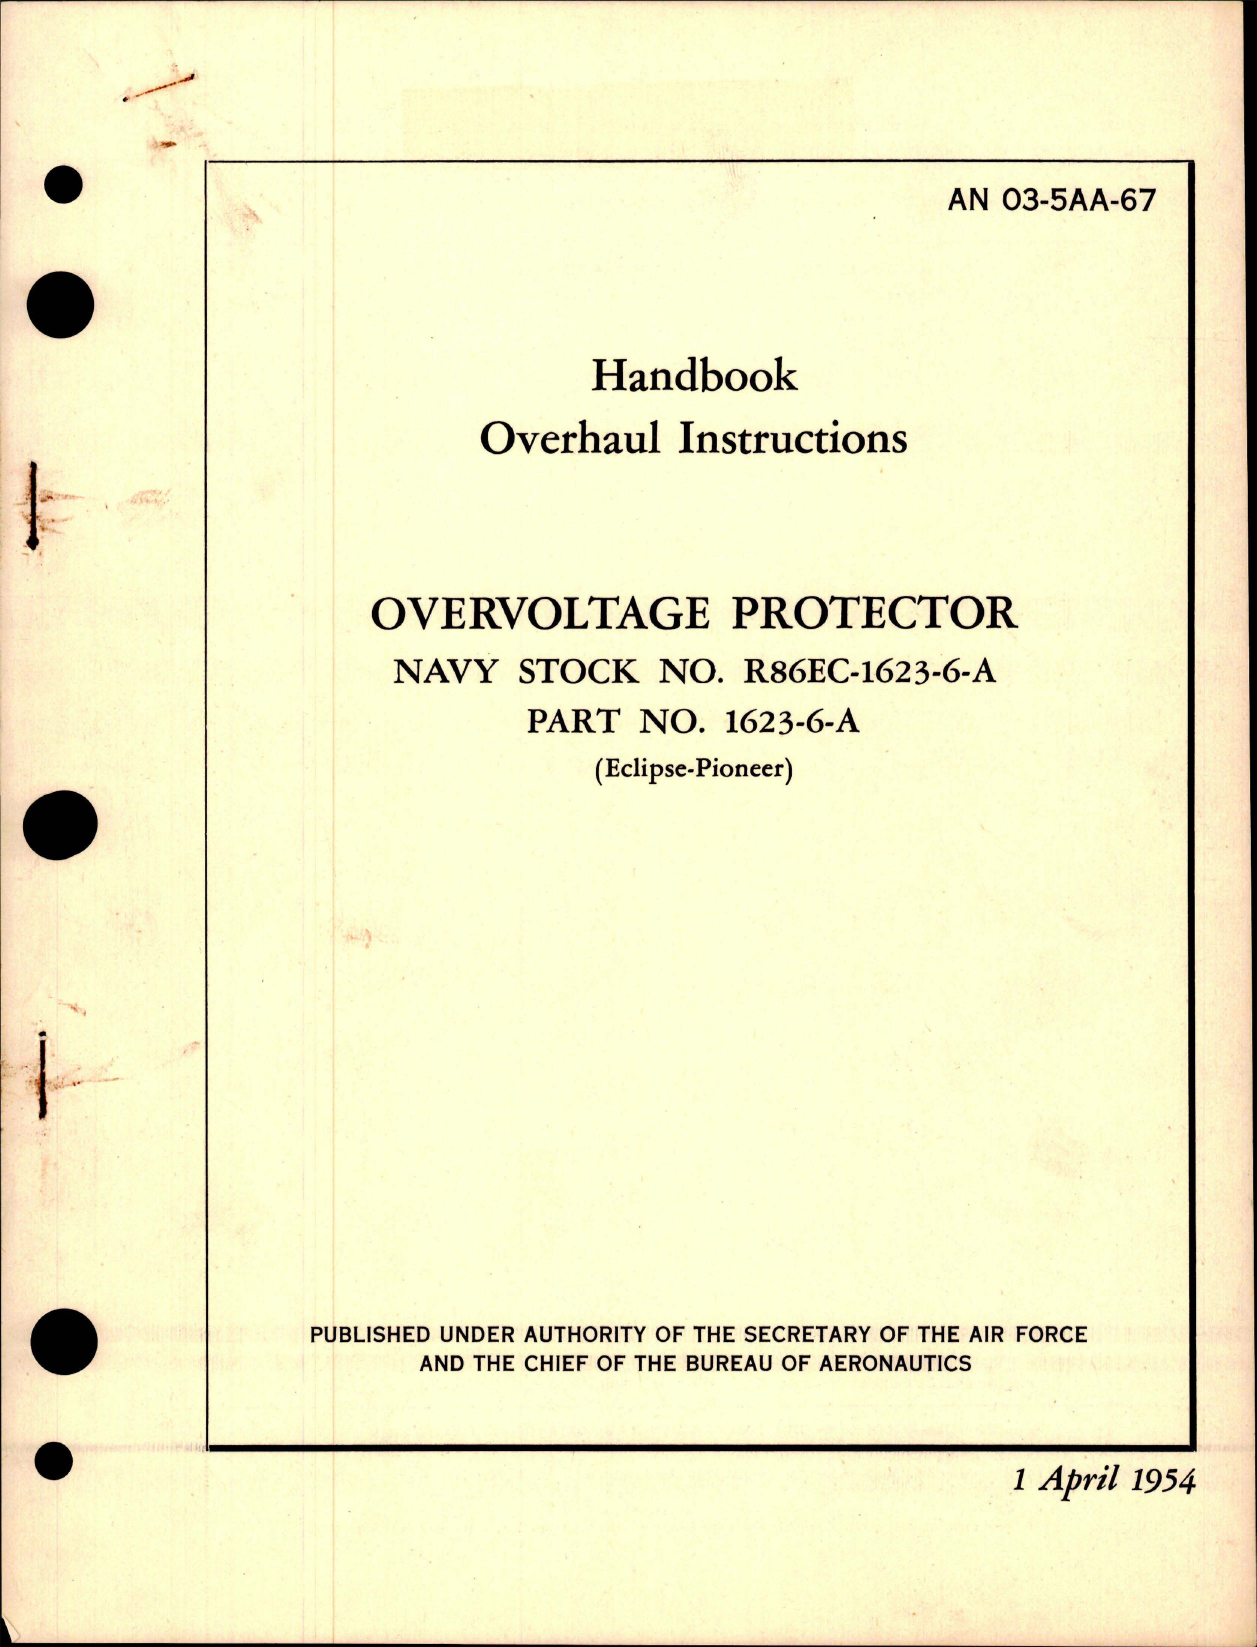 Sample page 1 from AirCorps Library document: Overhaul Instructions for Overvoltage Protector - Navy Stock R86EC-1623-6-A, Part 1623-6-A 